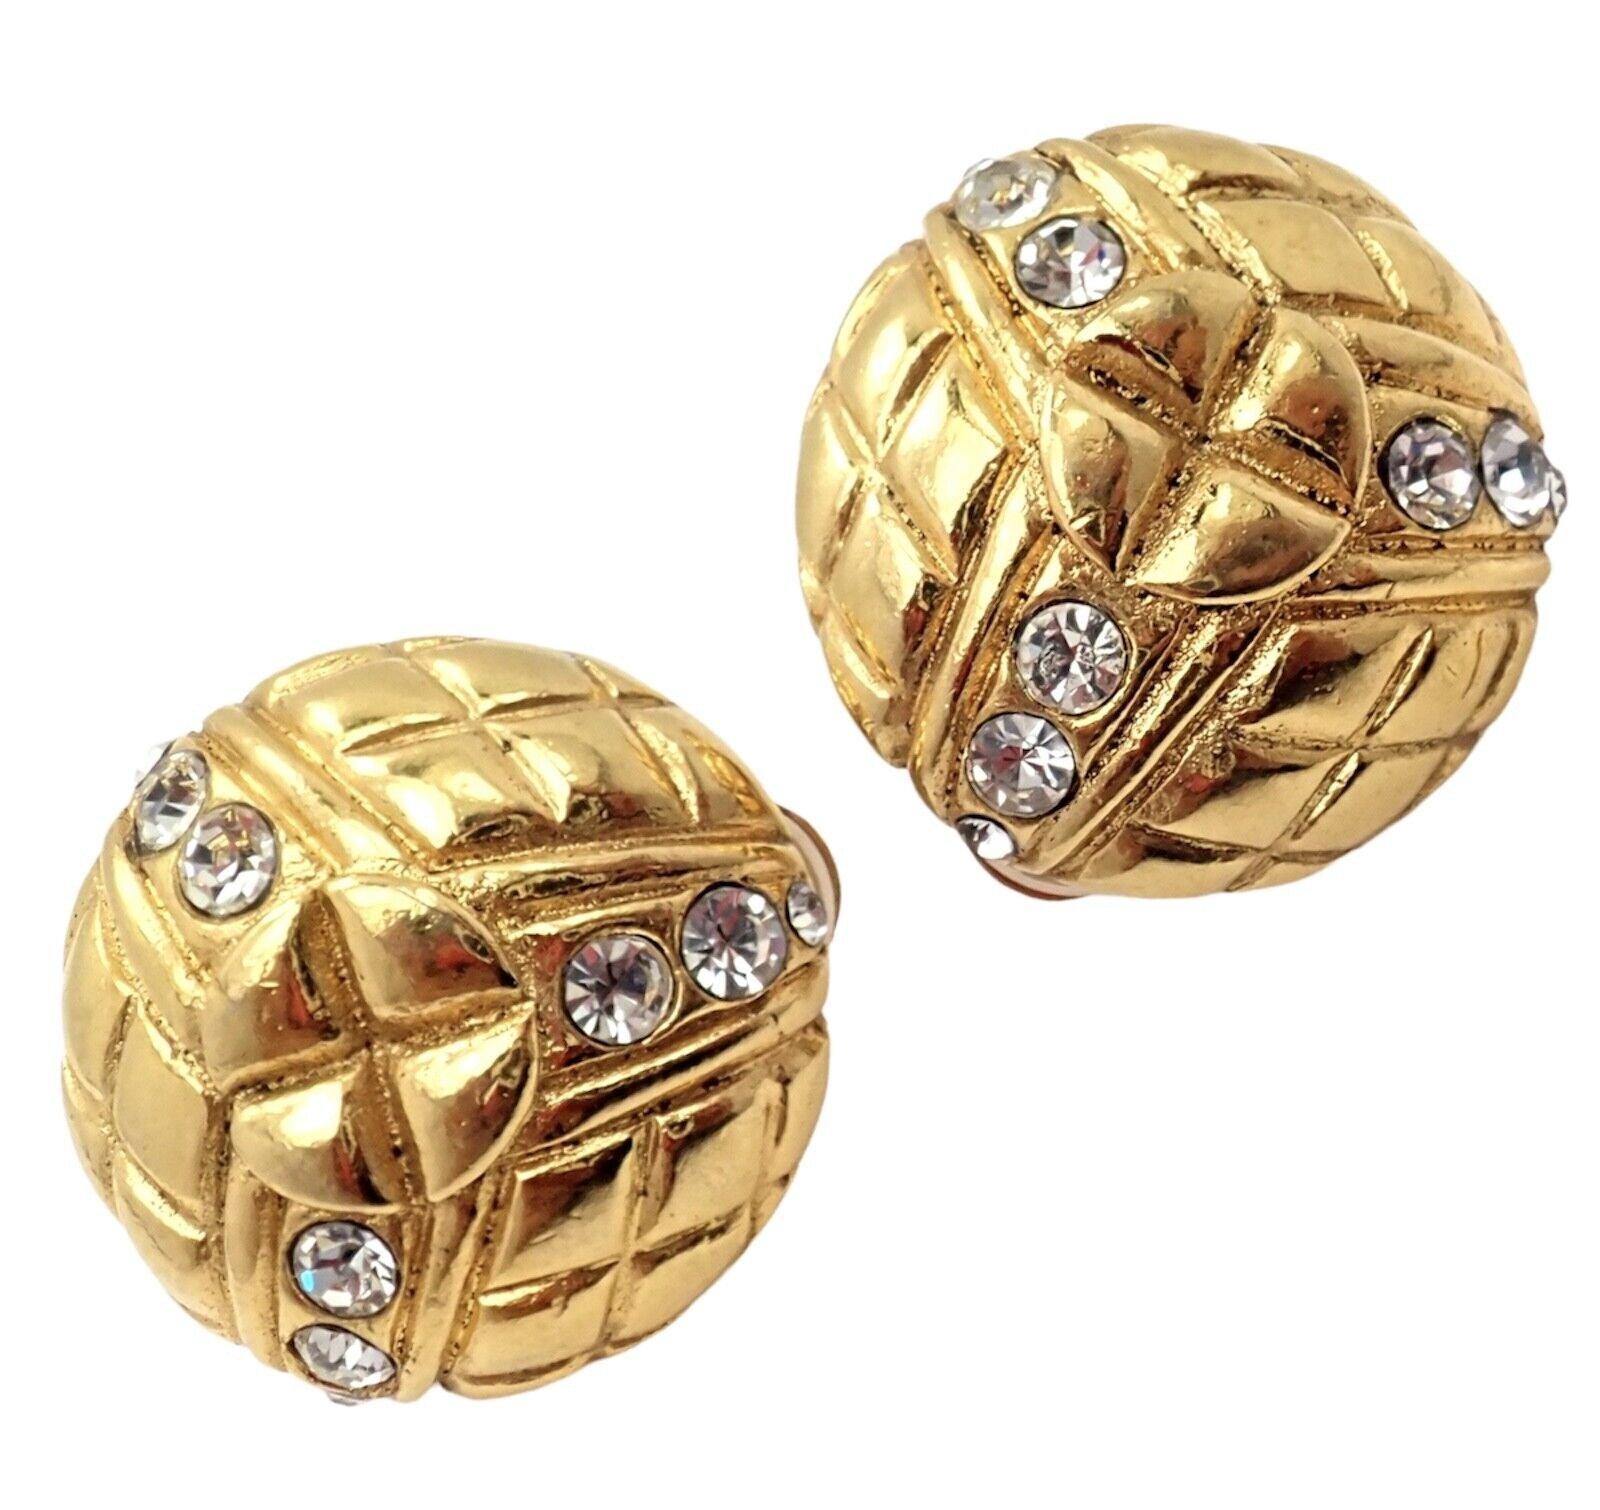 Chanel Vintage Gold Plated CC Gemstone Clip on Earrings - 2 Pieces